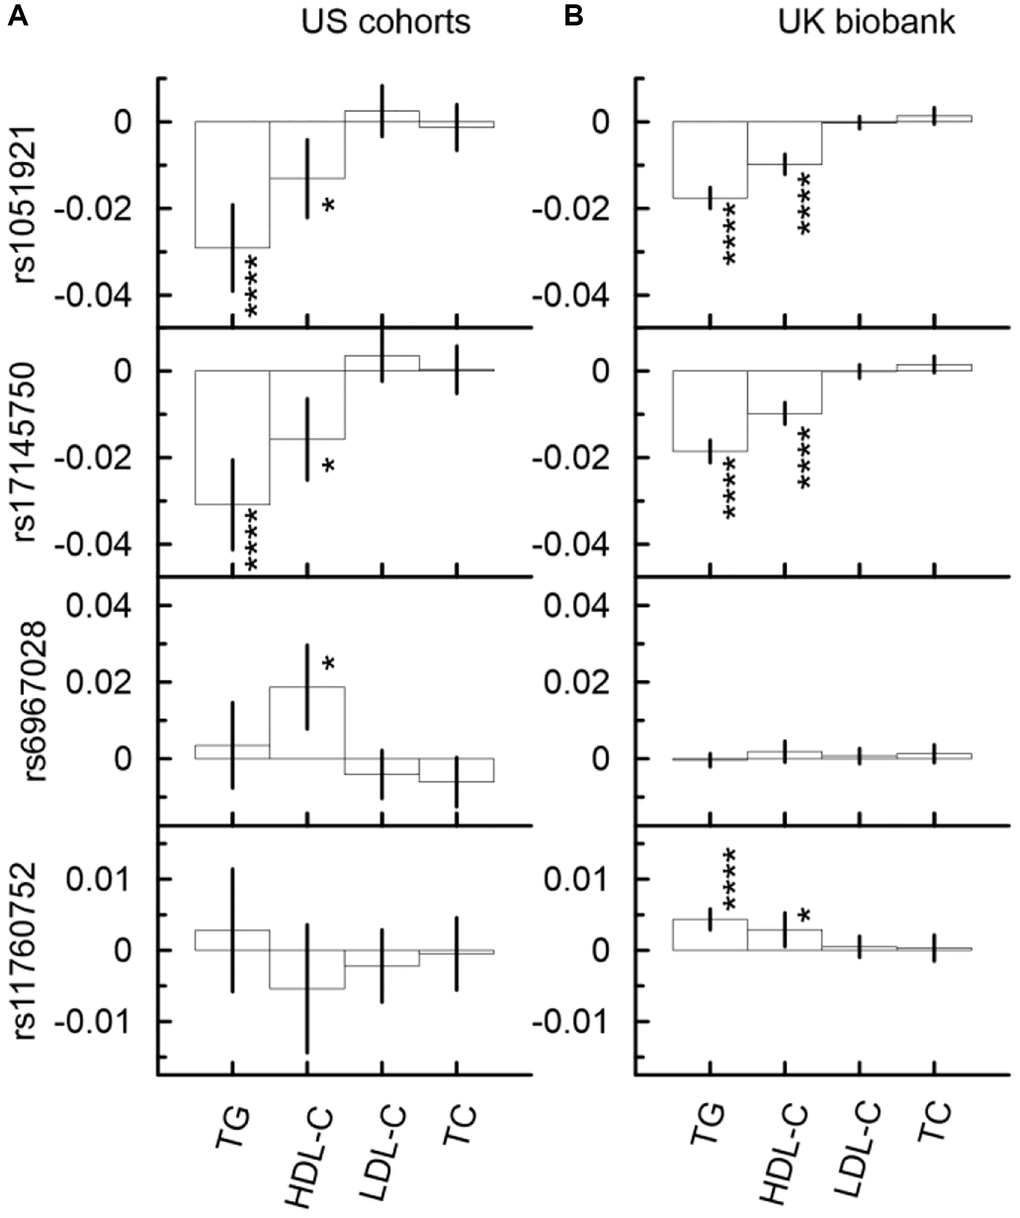 Indirect effects in the associations of the minor alleles of four SNPs from the MLXIPL gene with CHD through lipids in two samples drawn from US cohorts (A) and UK biobank (B). The Y-axis shows the indirect effect sizes (beta) of the associations of respective SNPs with CHD through the mediators depicted on the X axis. The X-axis shows the mediator variable used in the model. The vertical solid lines indicate 95% confidence intervals (CIs). Asterisks indicate different levels of significance, i.e., *5 × 10−4 ≤ p ****p −8.